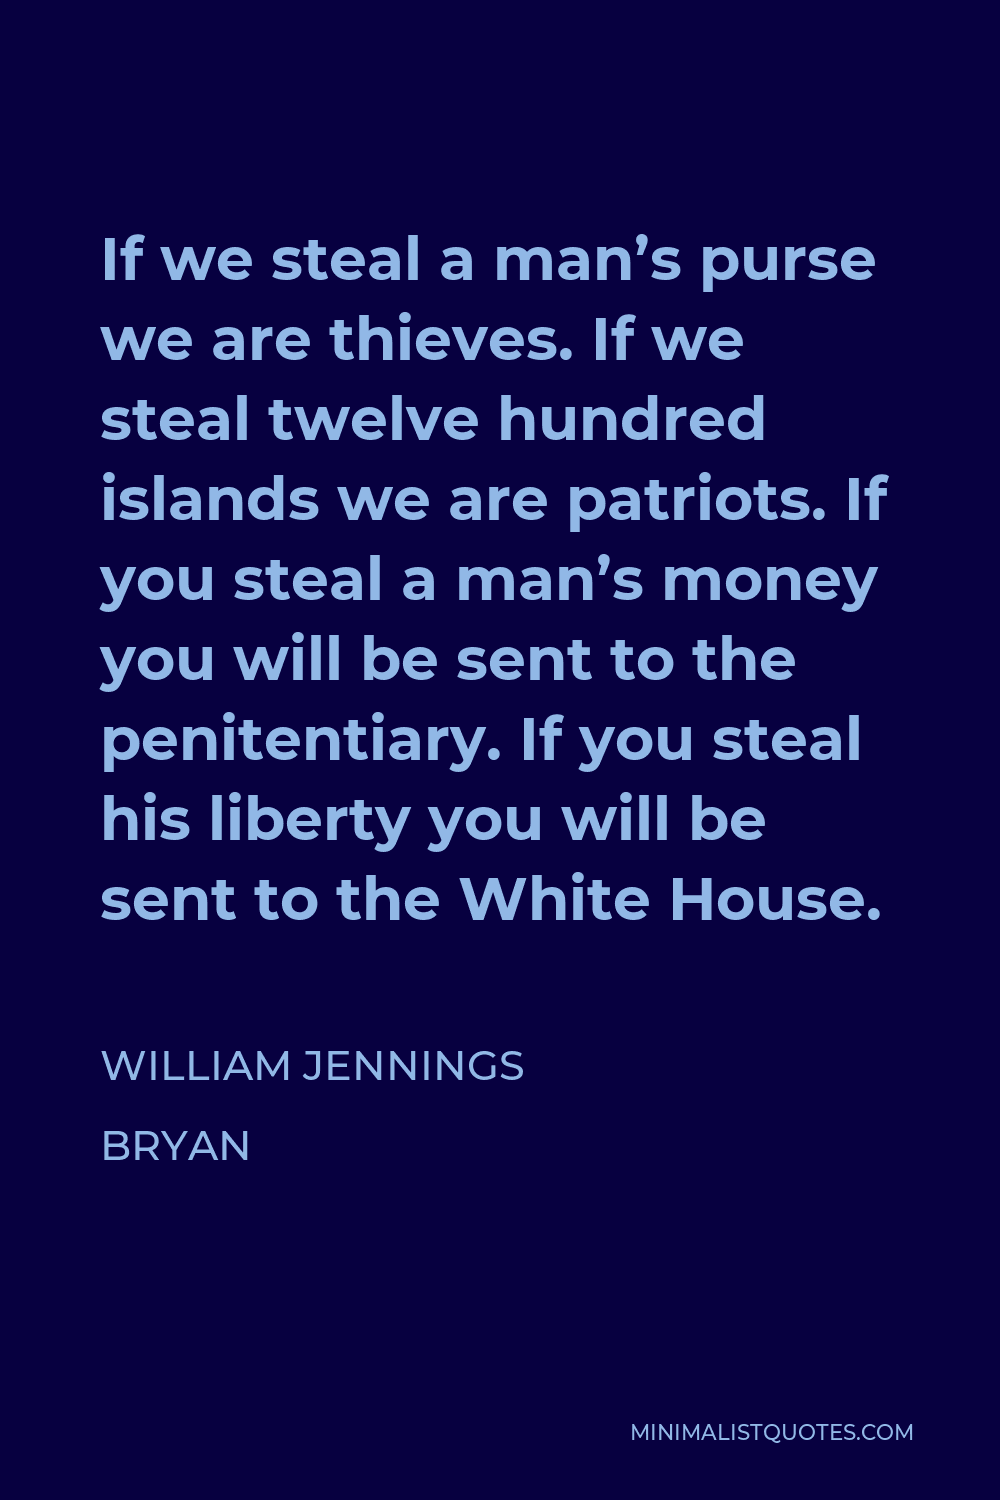 William Jennings Bryan Quote - If we steal a man’s purse we are thieves. If we steal twelve hundred islands we are patriots. If you steal a man’s money you will be sent to the penitentiary. If you steal his liberty you will be sent to the White House.